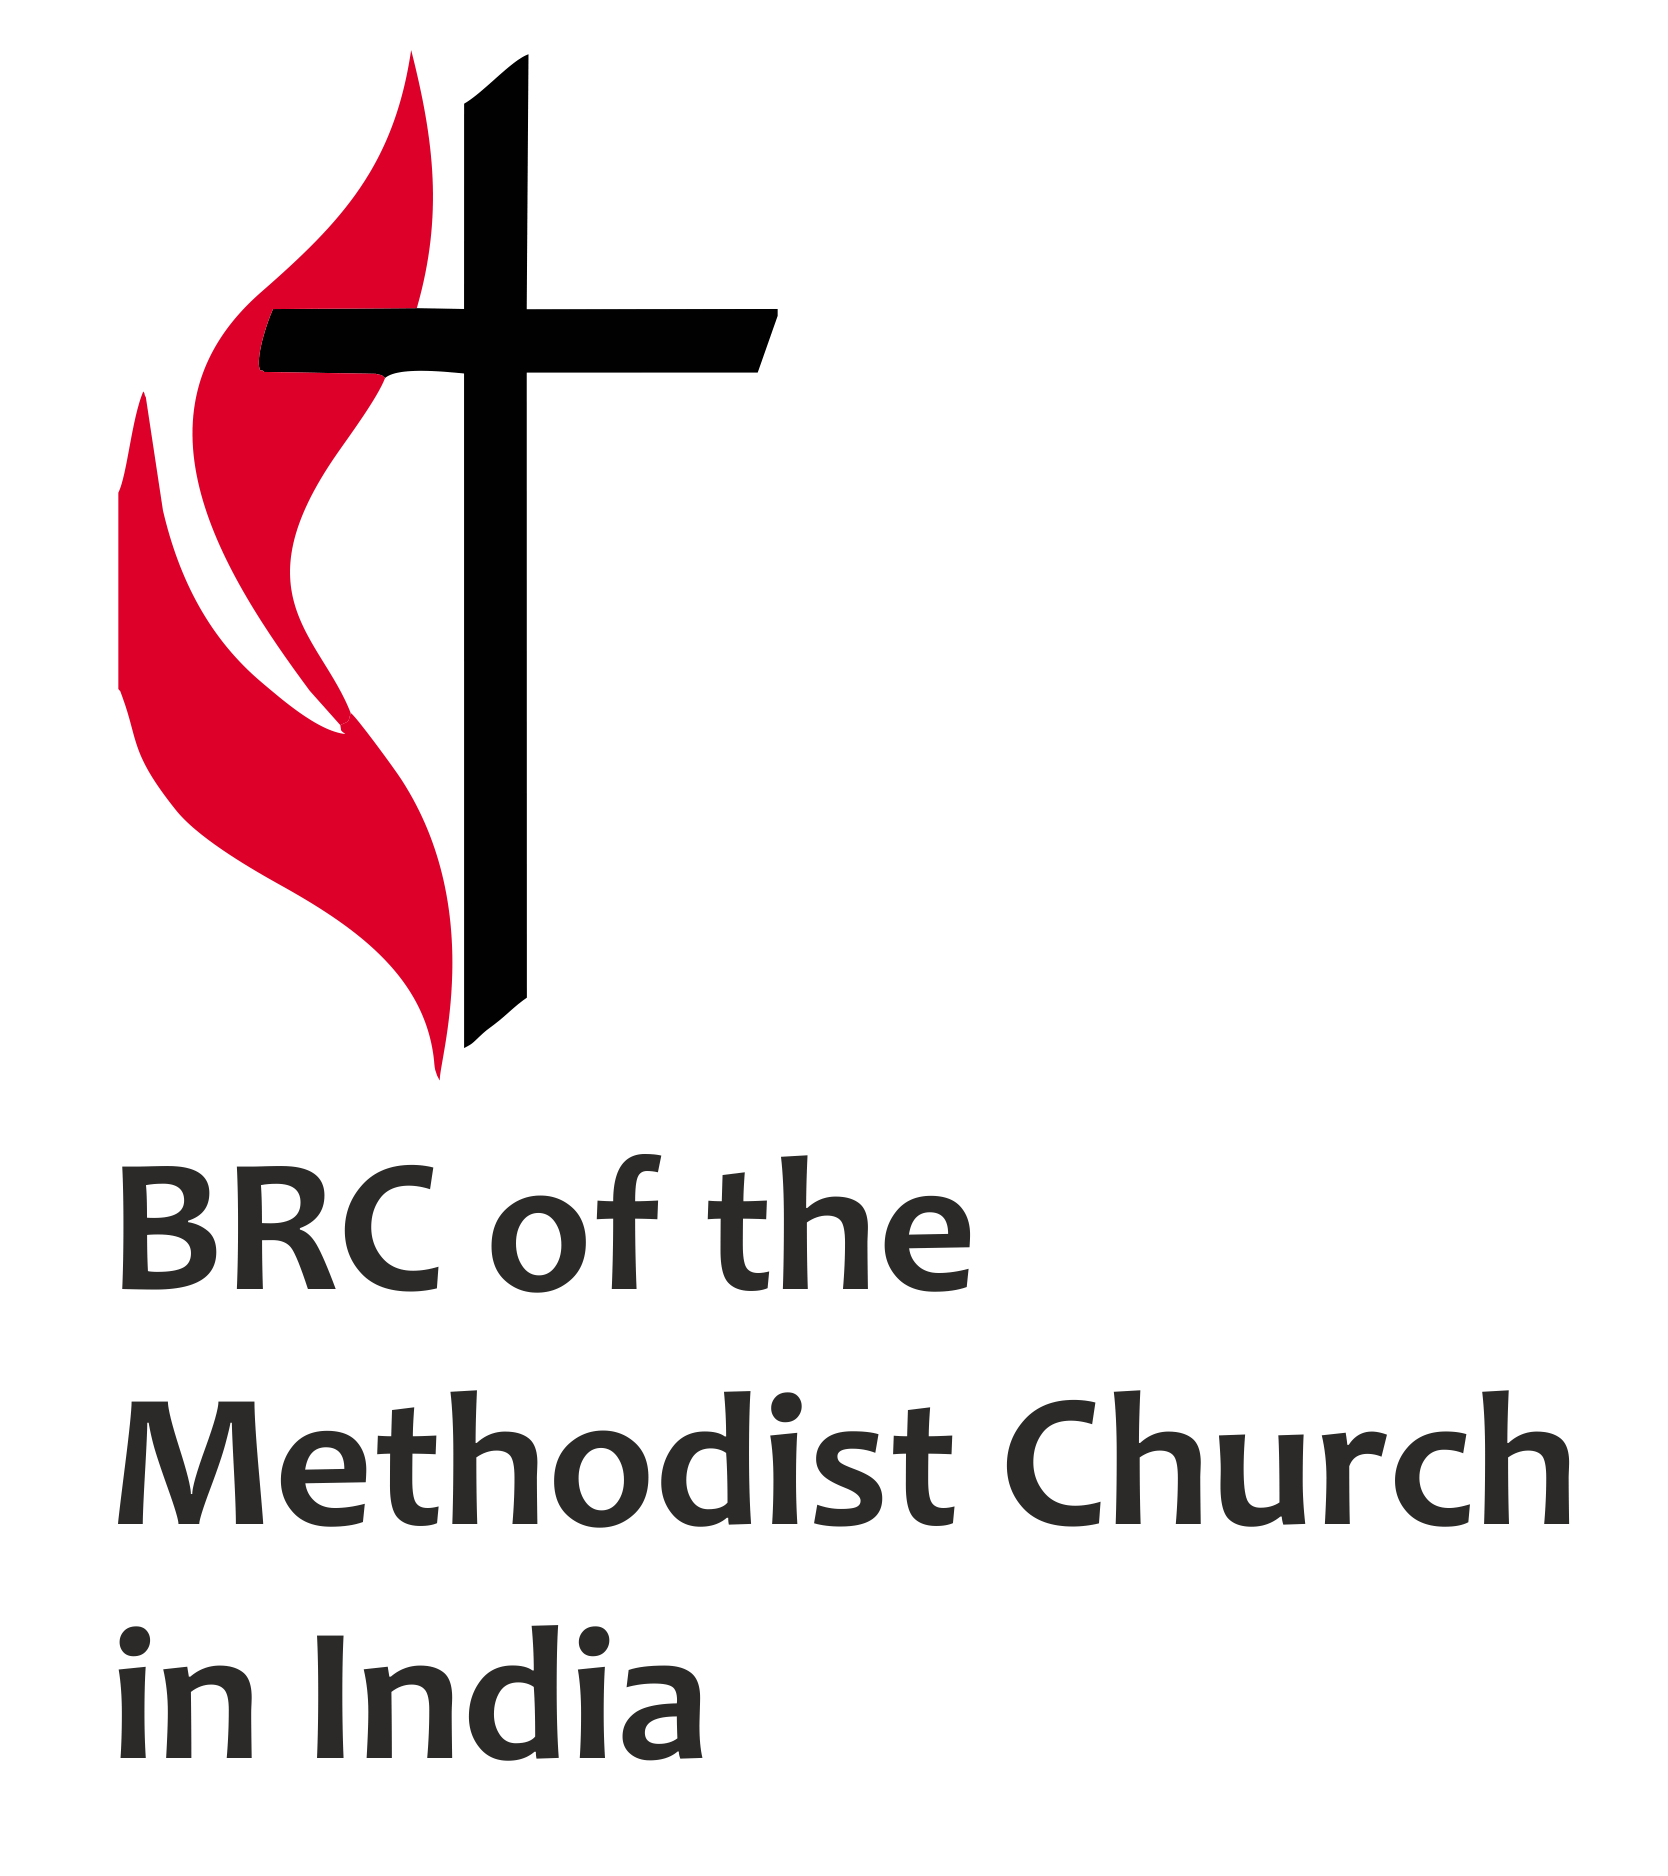 In association with the Methodist Church in India